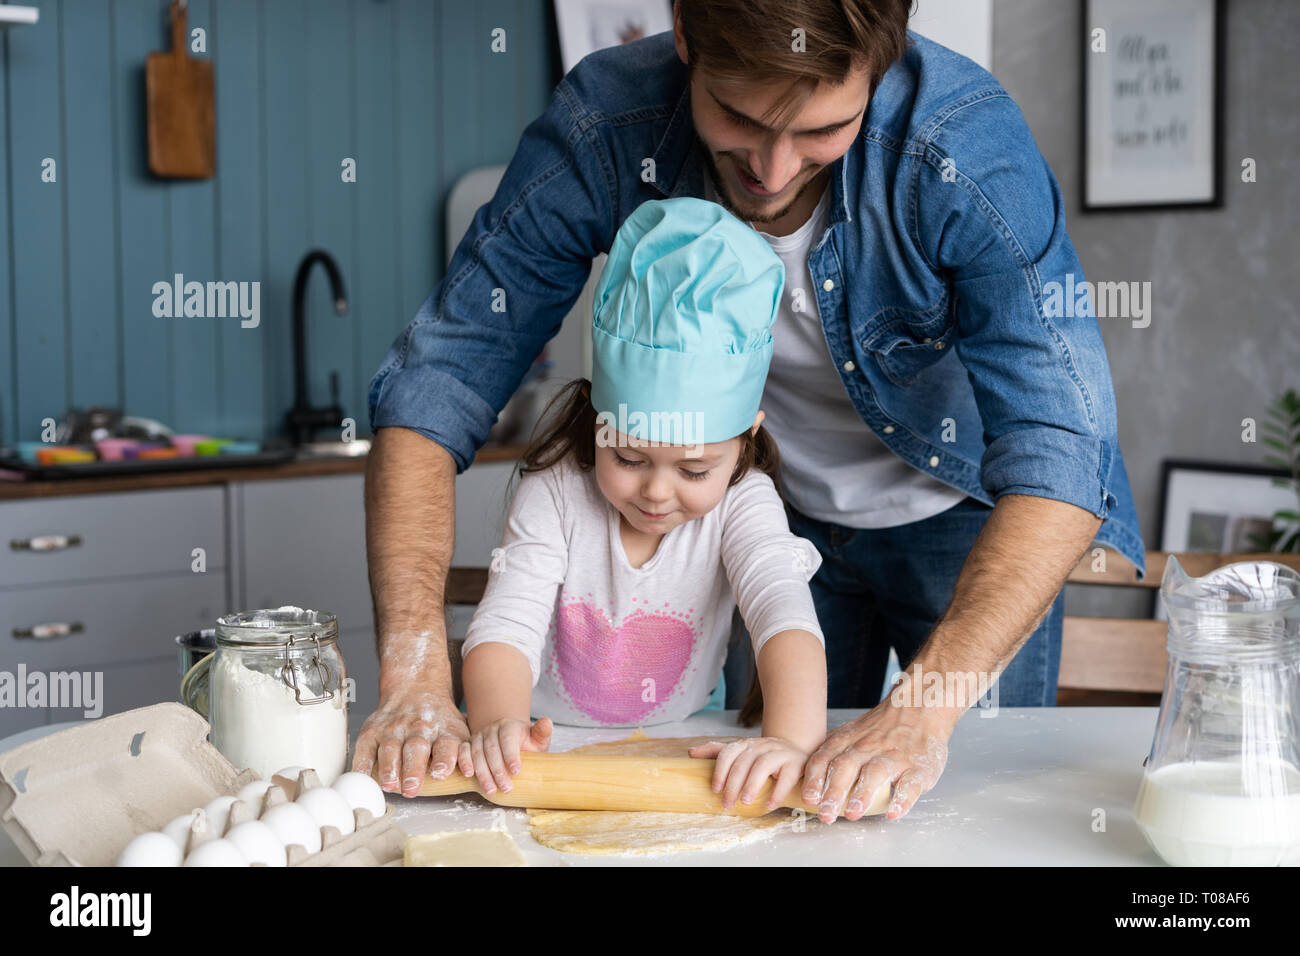 Daddy with daughter baking cake together in home kitchen. Stock Photo